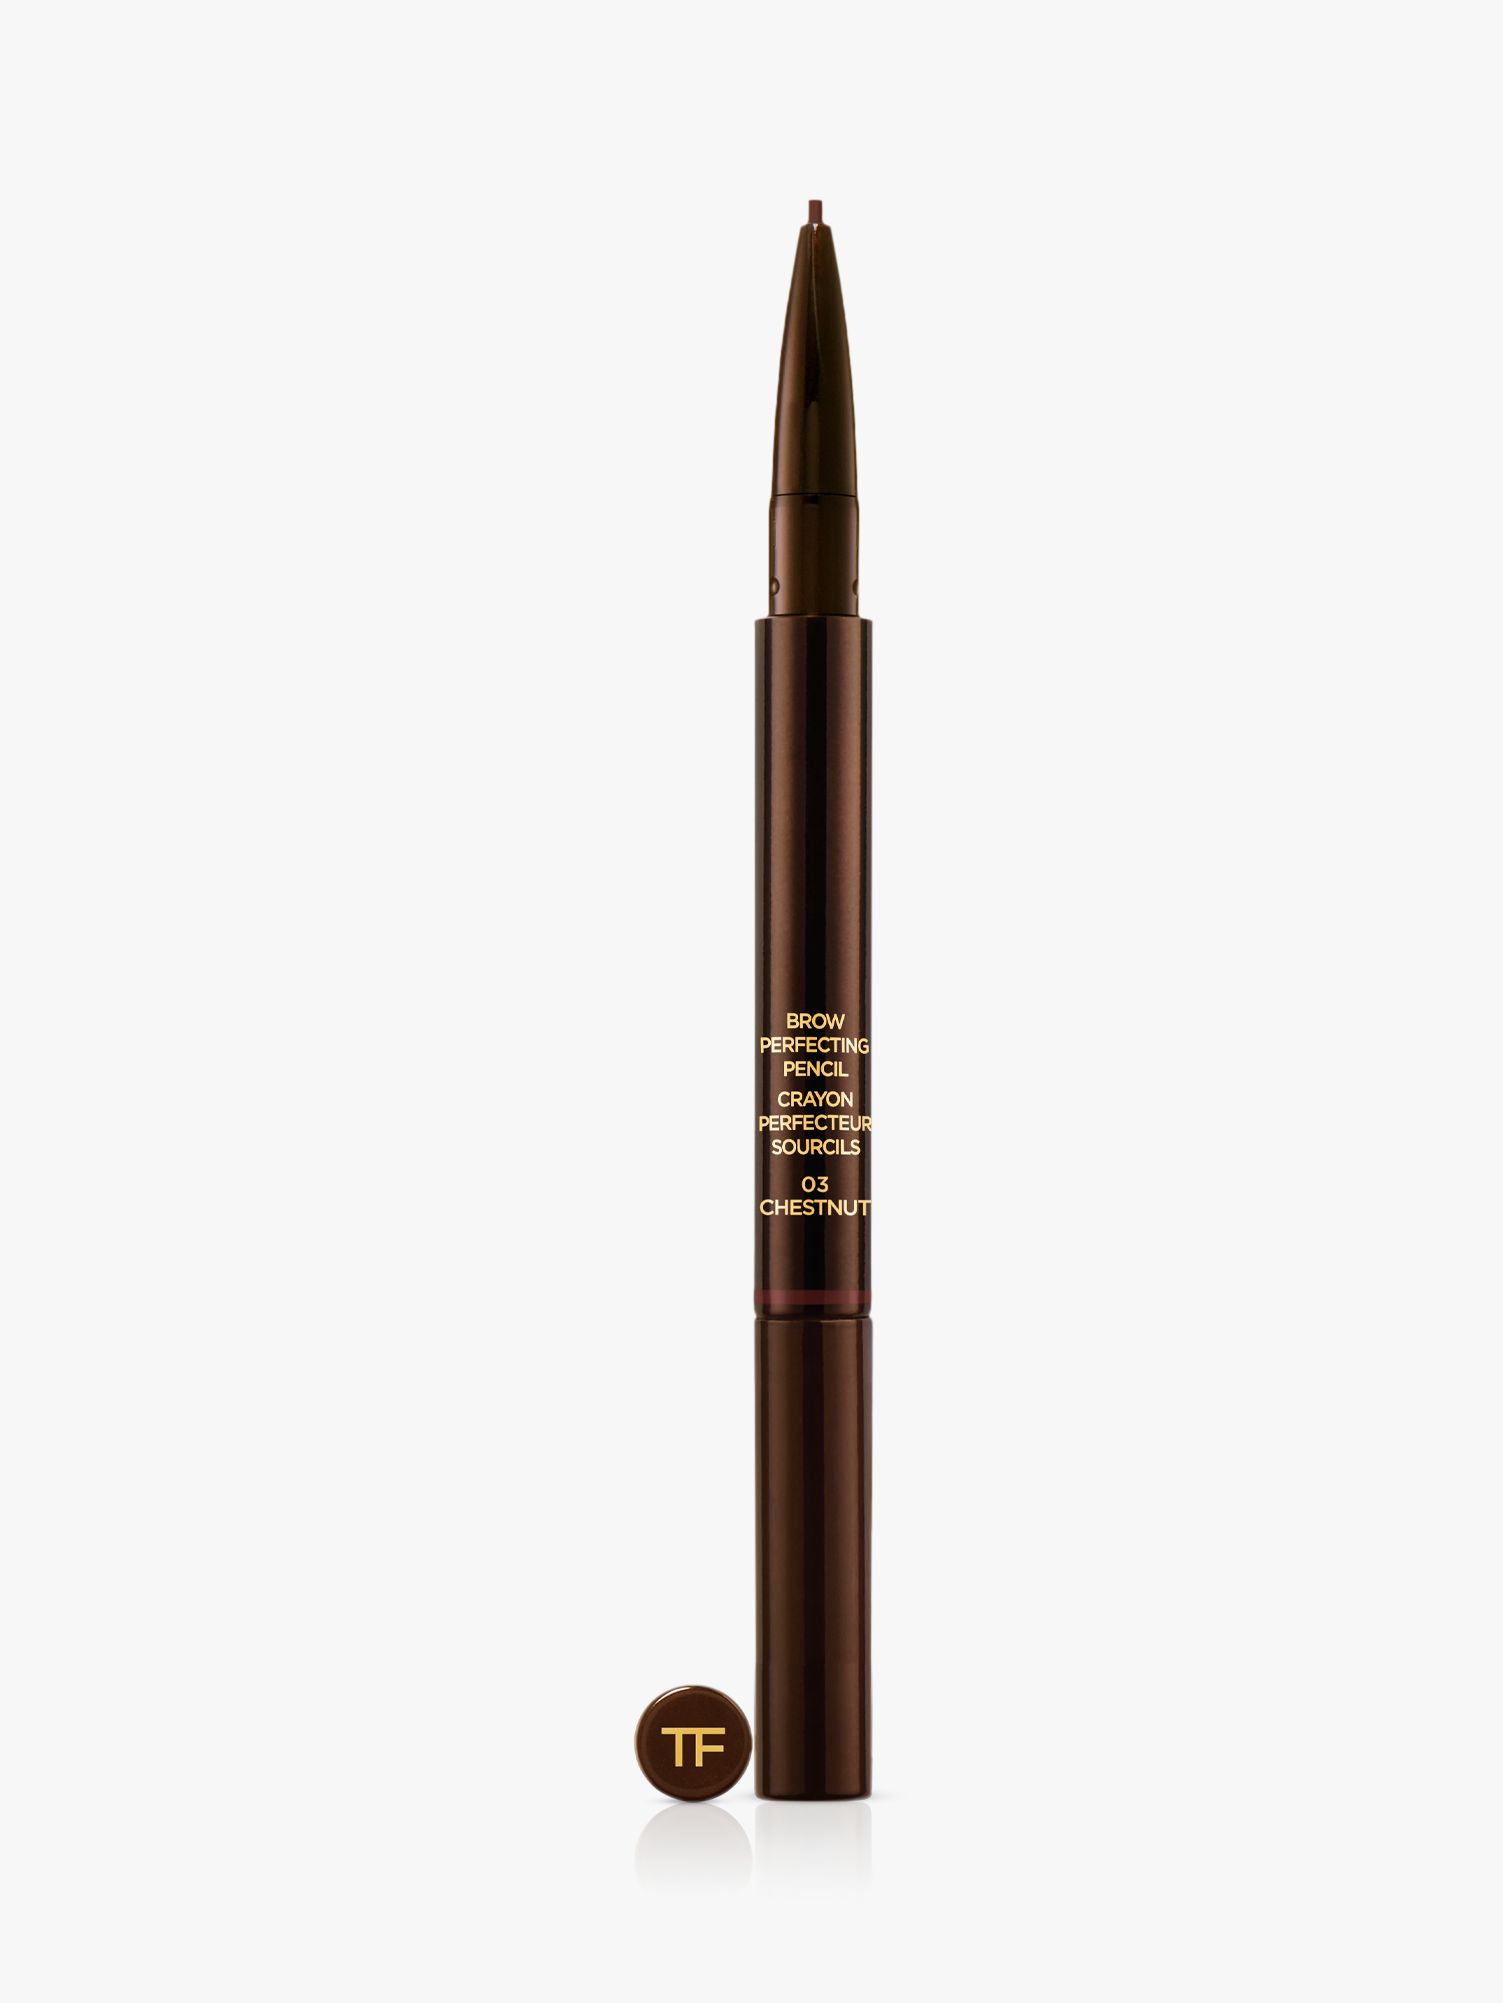 TOM FORD Brow Perfecting Pencil, 03 Chestnut at John Lewis & Partners